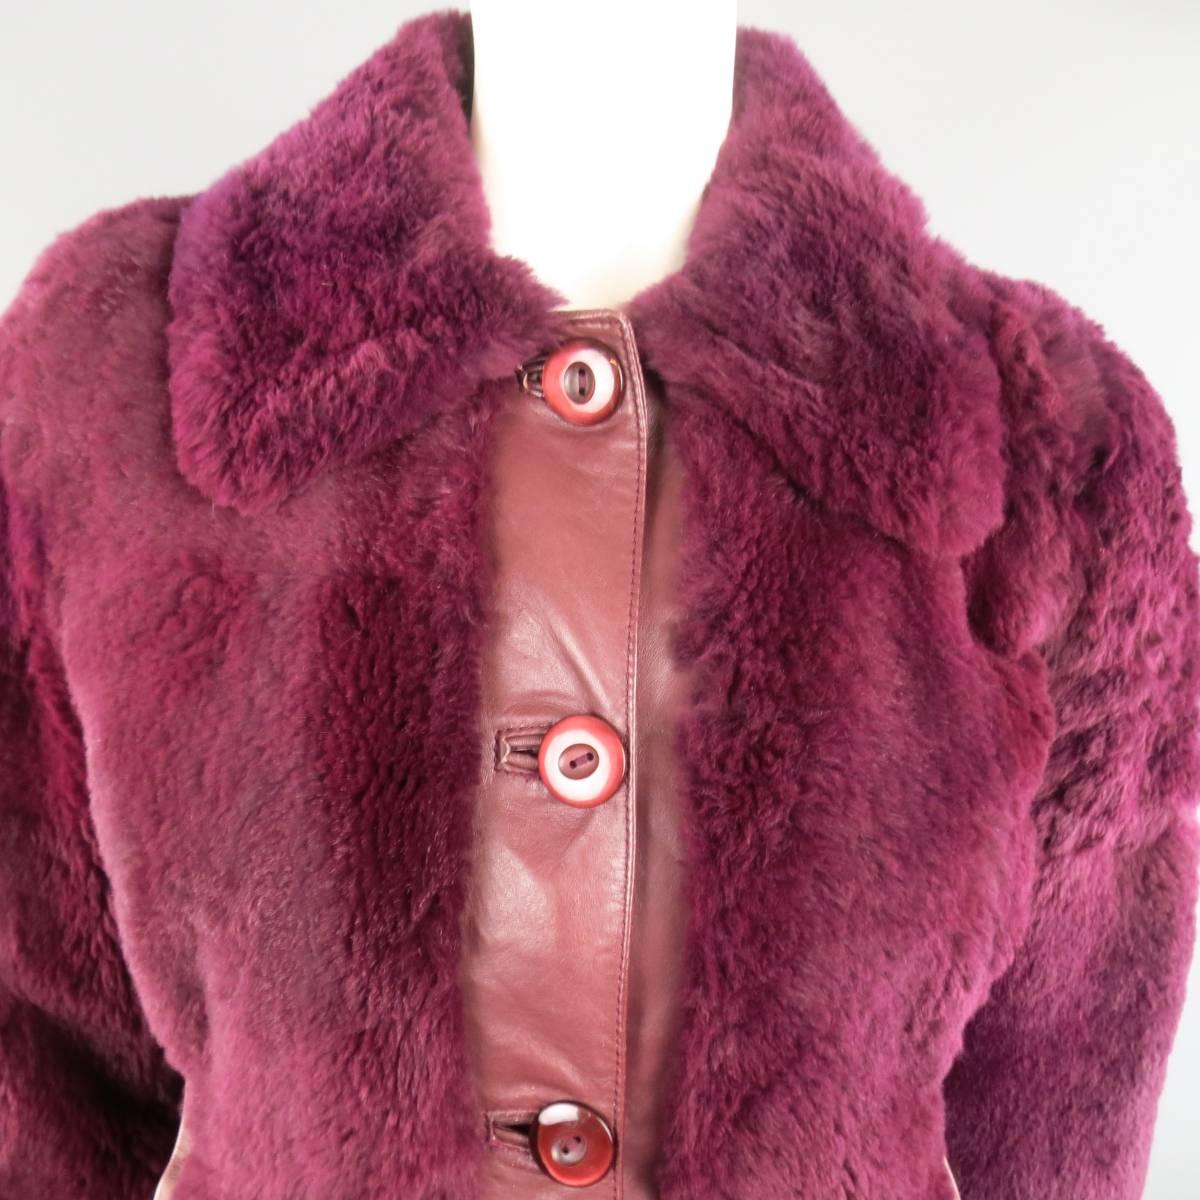 D&G by DOLCE & GABBANA bomber jacket comes in a dark magenta purple leather with matching colored rabbit fur panels and features a large pointed collar, button up closure, and ribbed waistband. Wear and imperfections throughout fur. As-Is. Priced